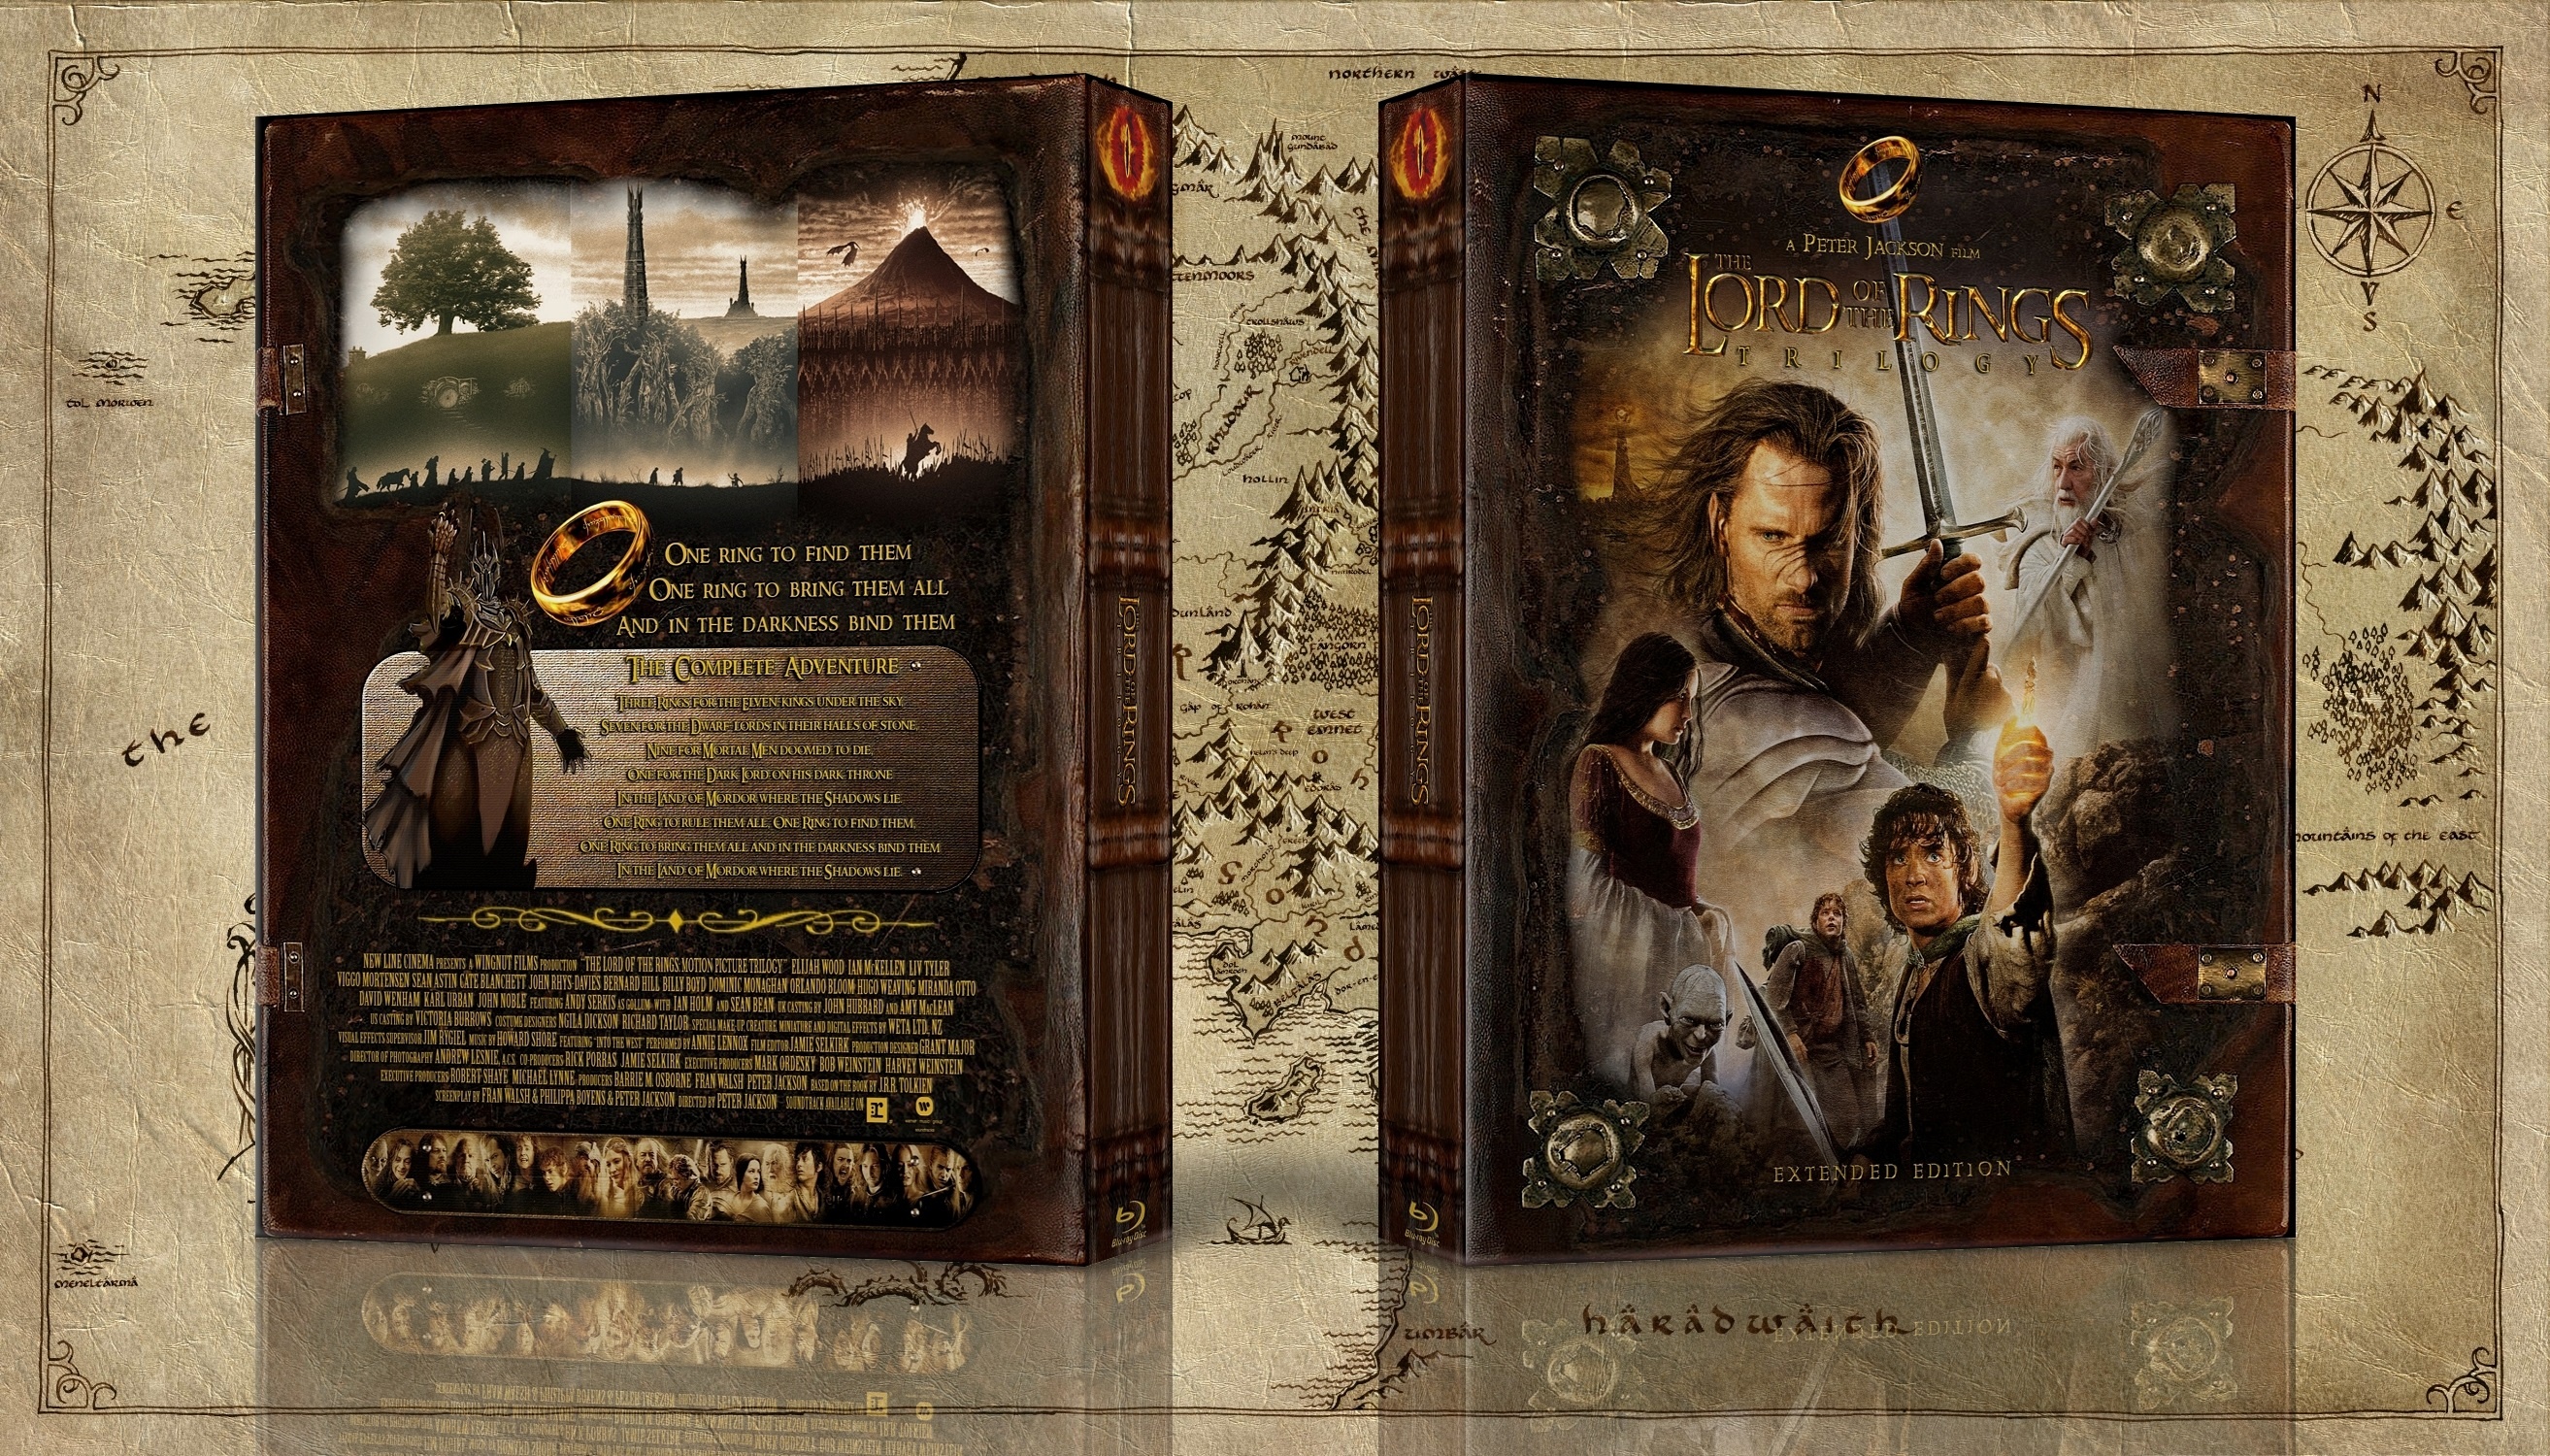 The Lord of the Rings Trilogy box cover